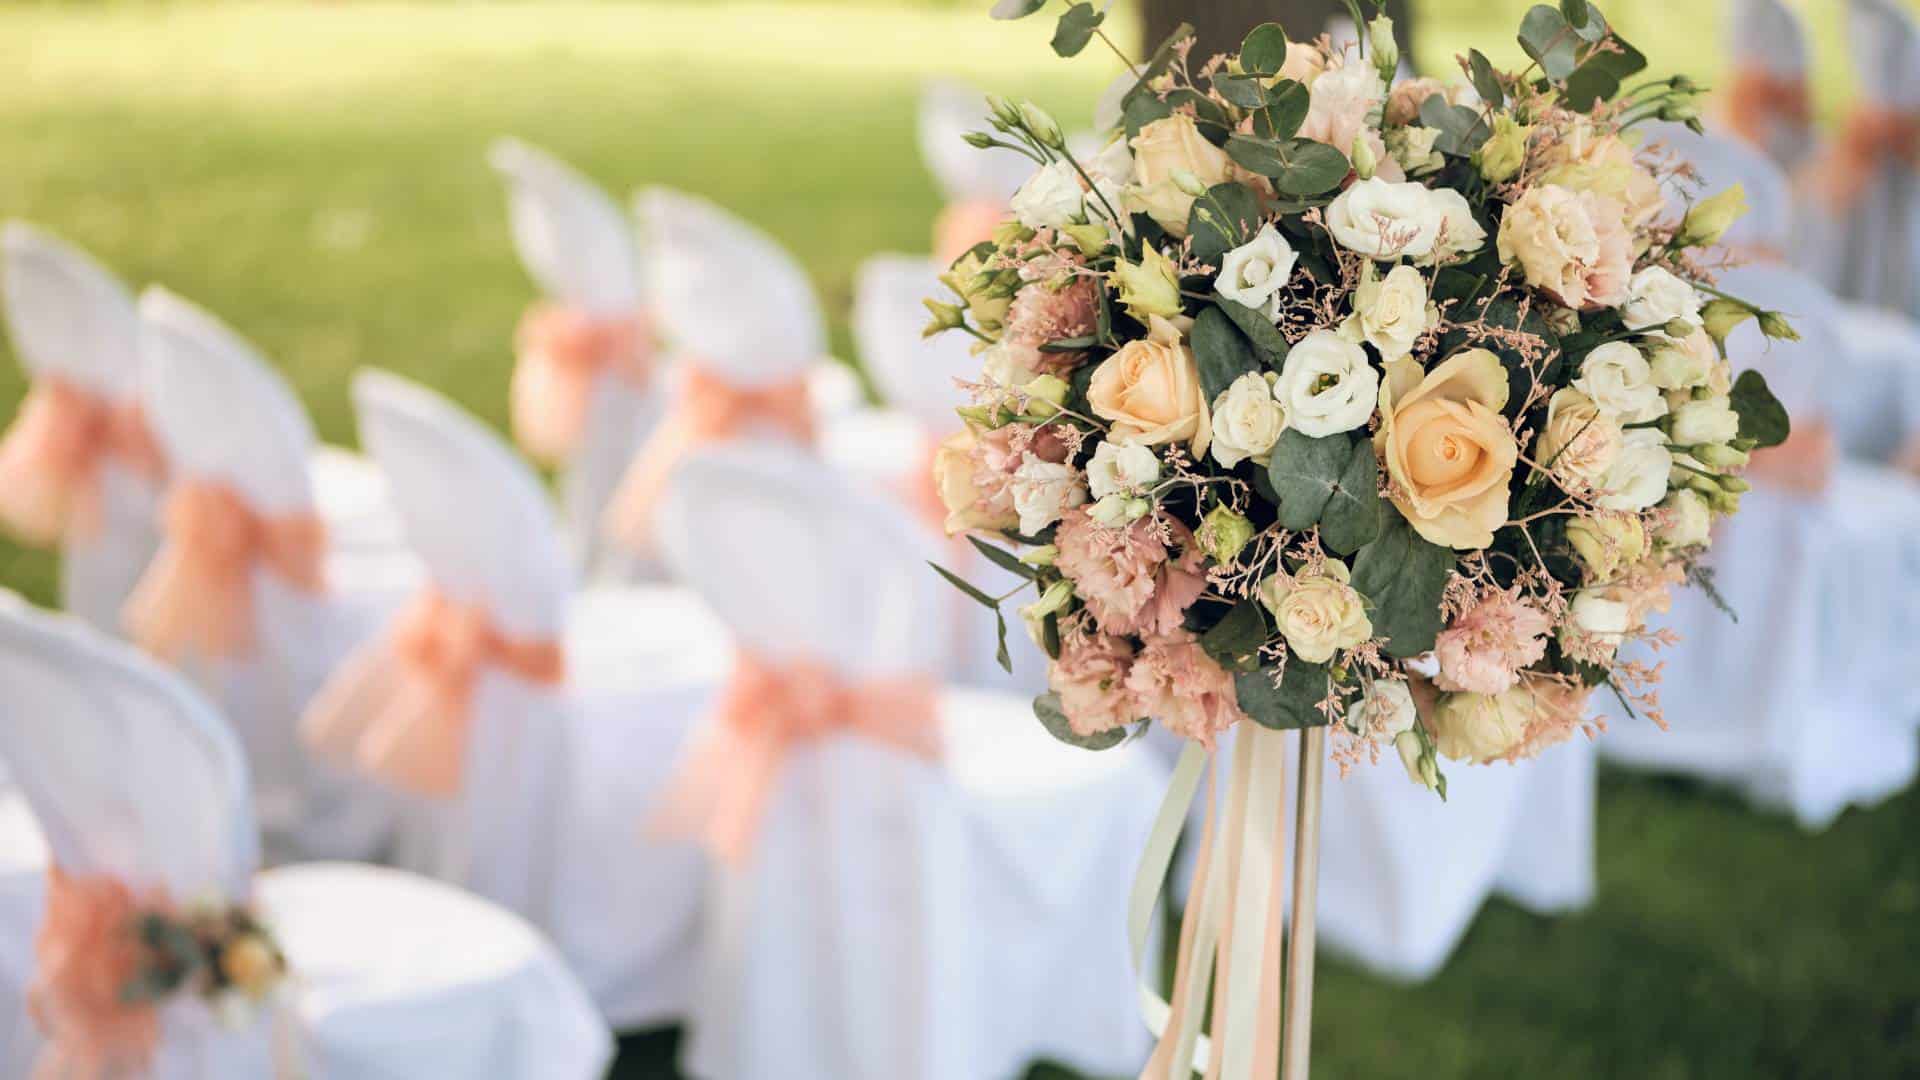 what are the best color schemes for an outdoor wedding venue